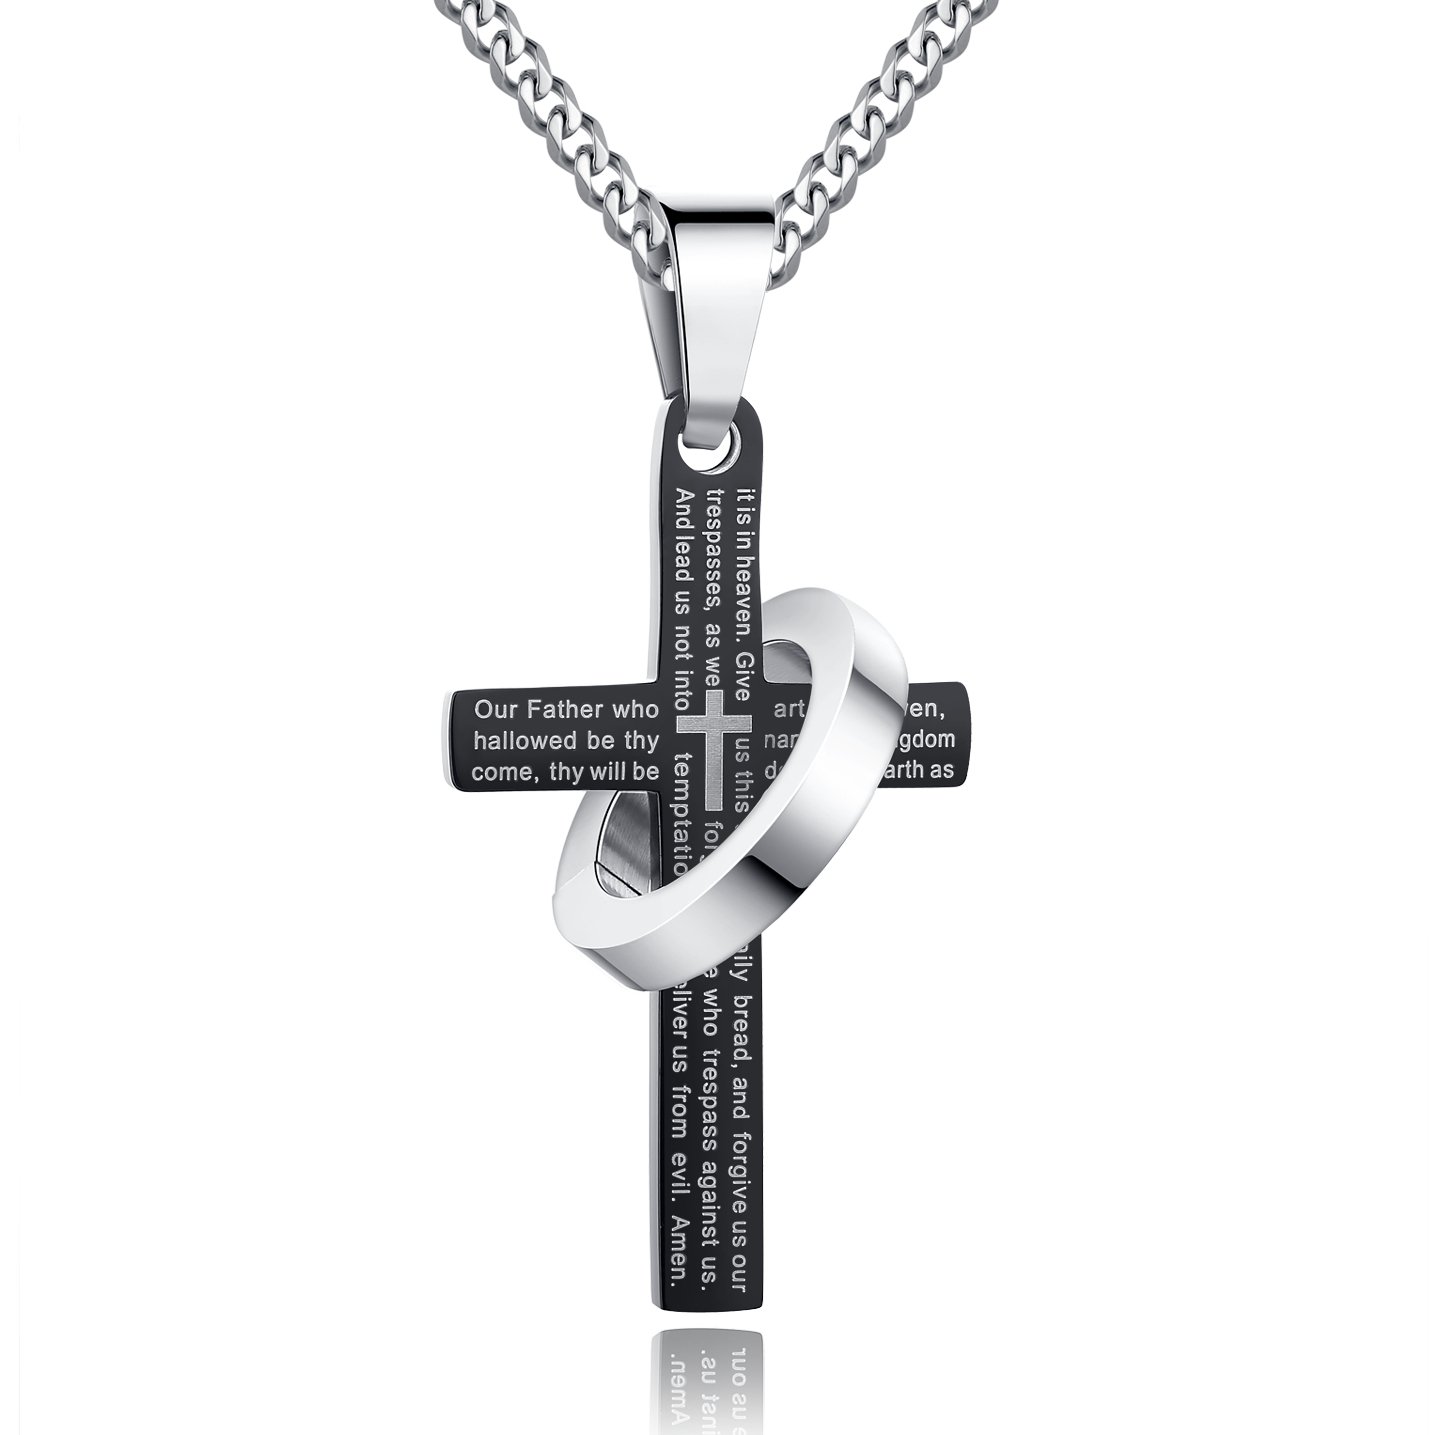 Silver stainless steel Our father pray  engraving pendant